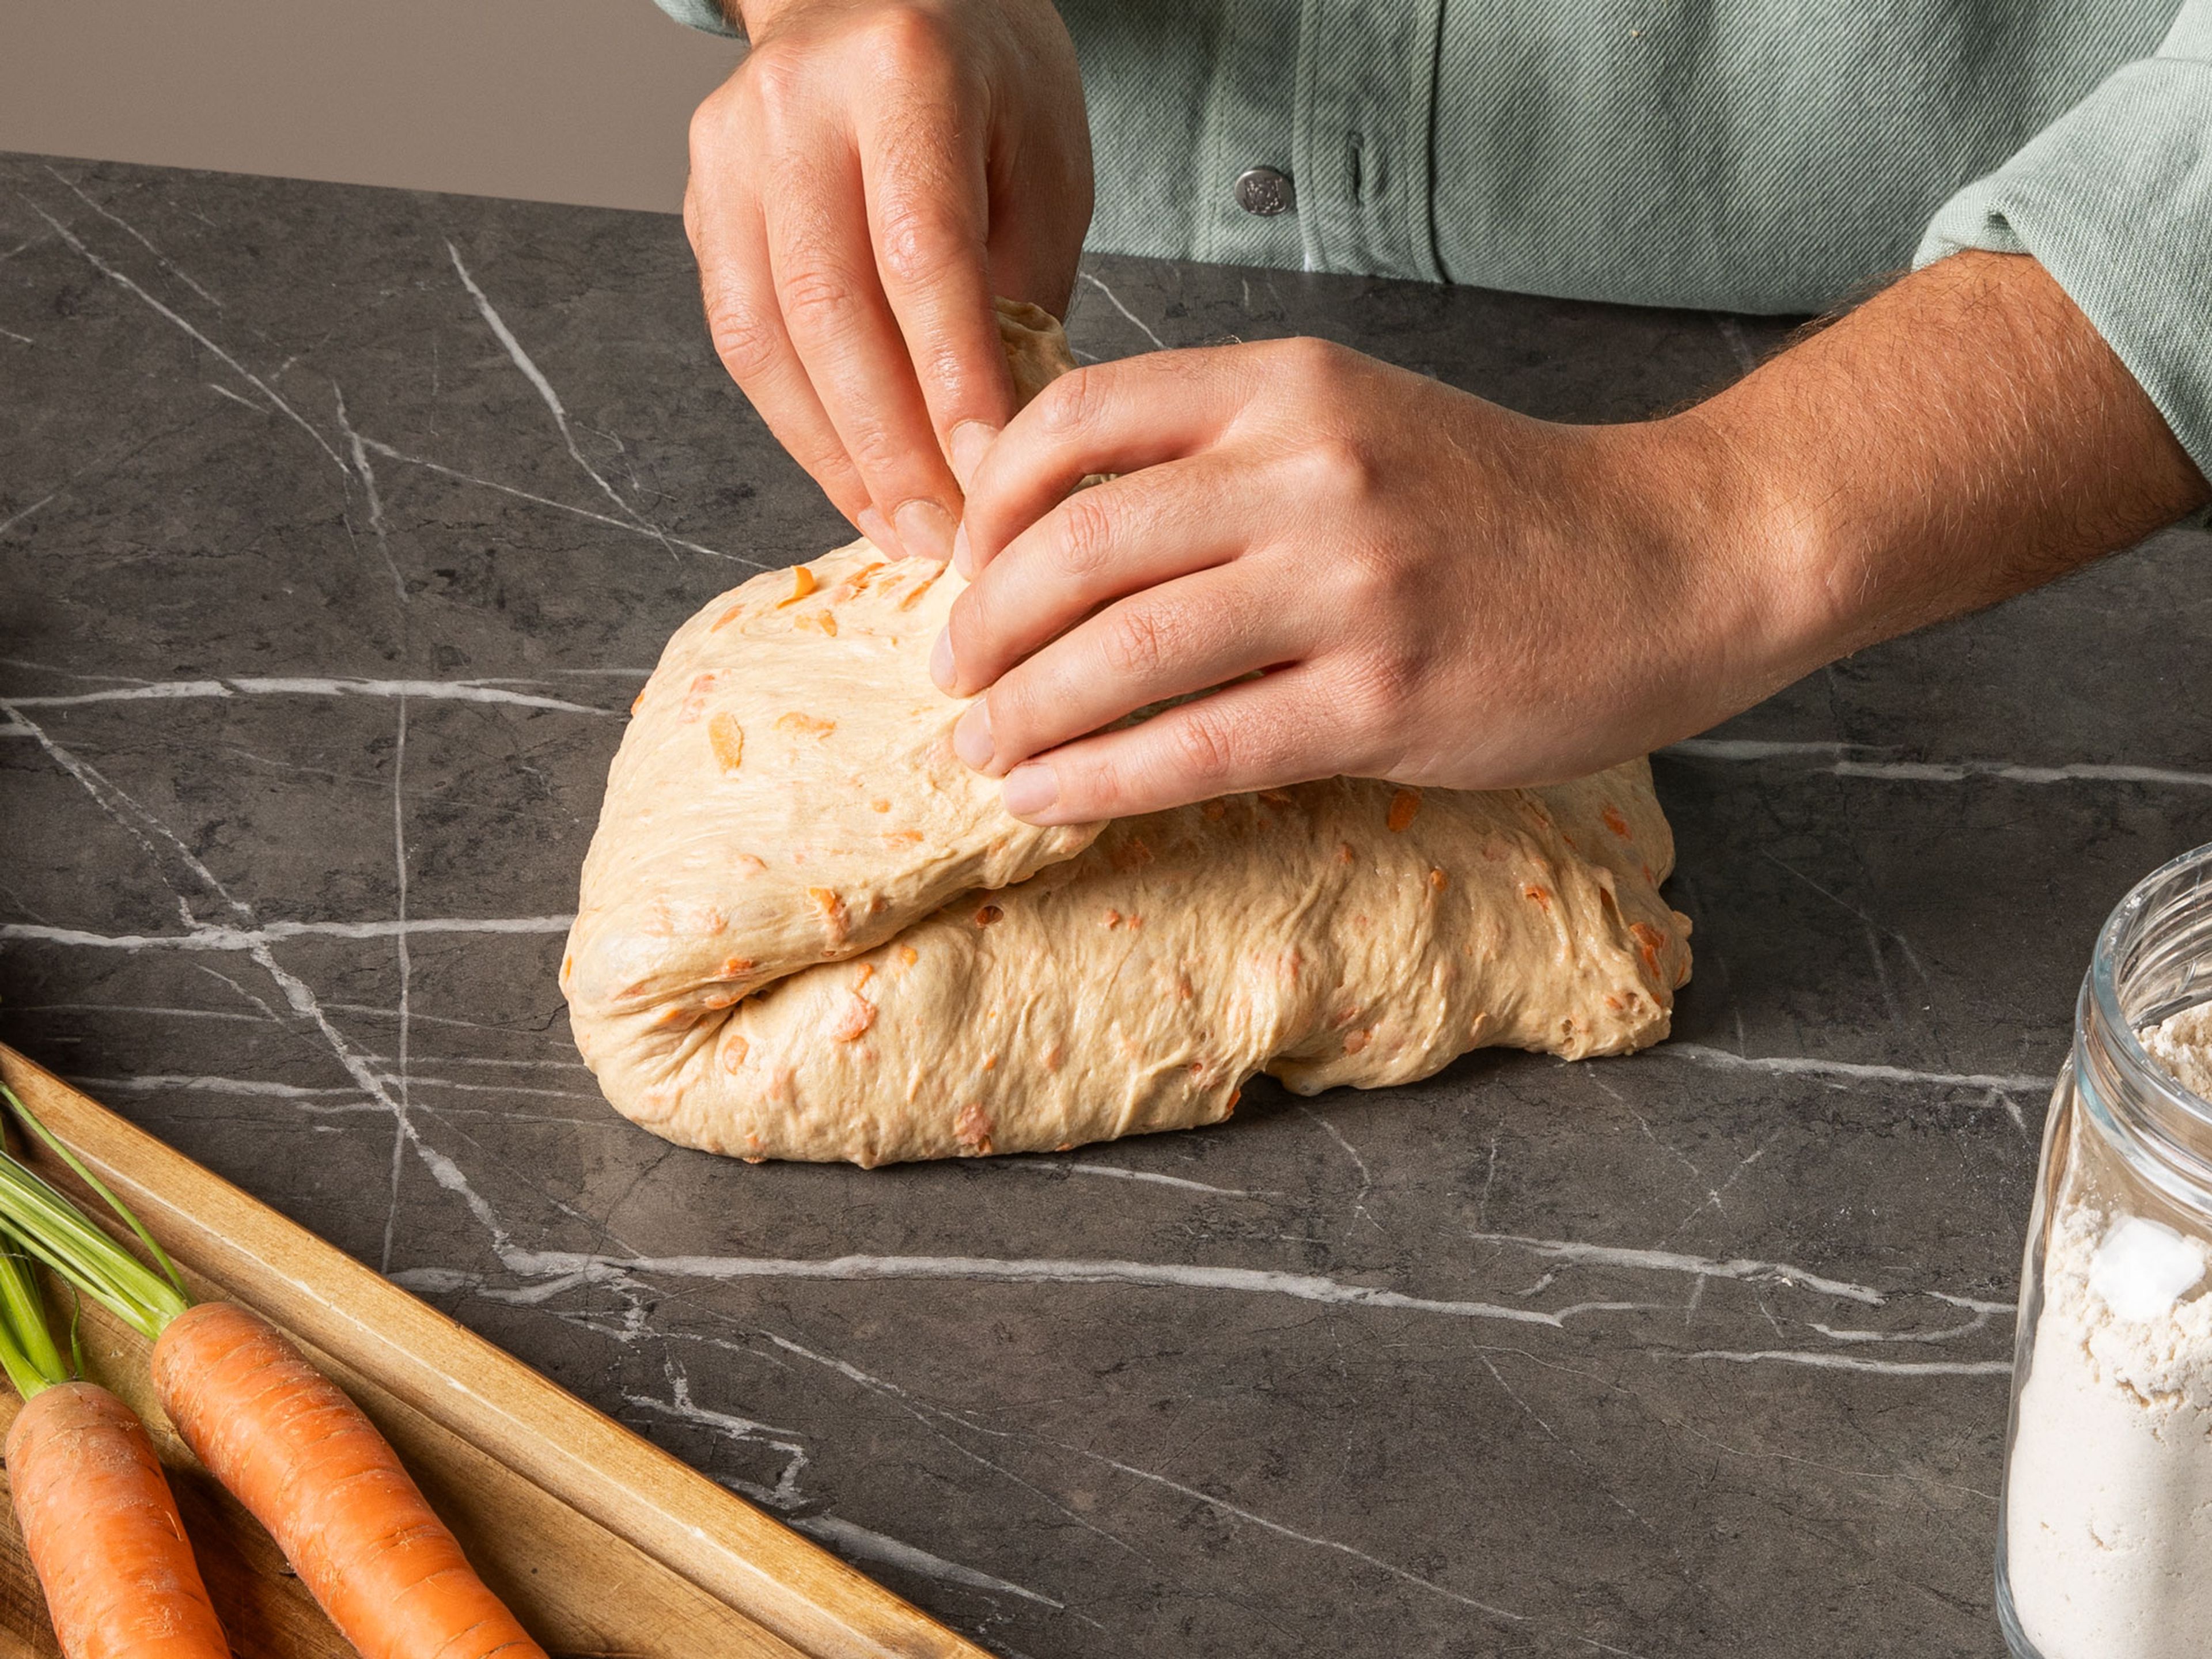 Once the dough has finished rising, slightly wet the counter and transfer dough to the surface. Using wet hands, slightly flatten the dough. Grab it from the end closest to you, pull it towards you and fold it into the middle. Continue with all four sides. Flip the dough over so the seam-side is on the counter and begin building tension on the surface of the dough by pulling it towards you in a circular motion using the outer sides of your palm. Do this a few times until the dough has a tight surface, wet your hands whenever necessary. Dust a proofing basket with lots of rice flour. Move it around to make sure all of the crevasses and sides are floured. Flour the top of the dough with rice flour and transfer seam-side up into the basket. Flour the exposed side of the bread as well. Cover the bread with a damp kitchen towel and allow to proof for another 1-1.5 hrs. or until it has doubled in size.